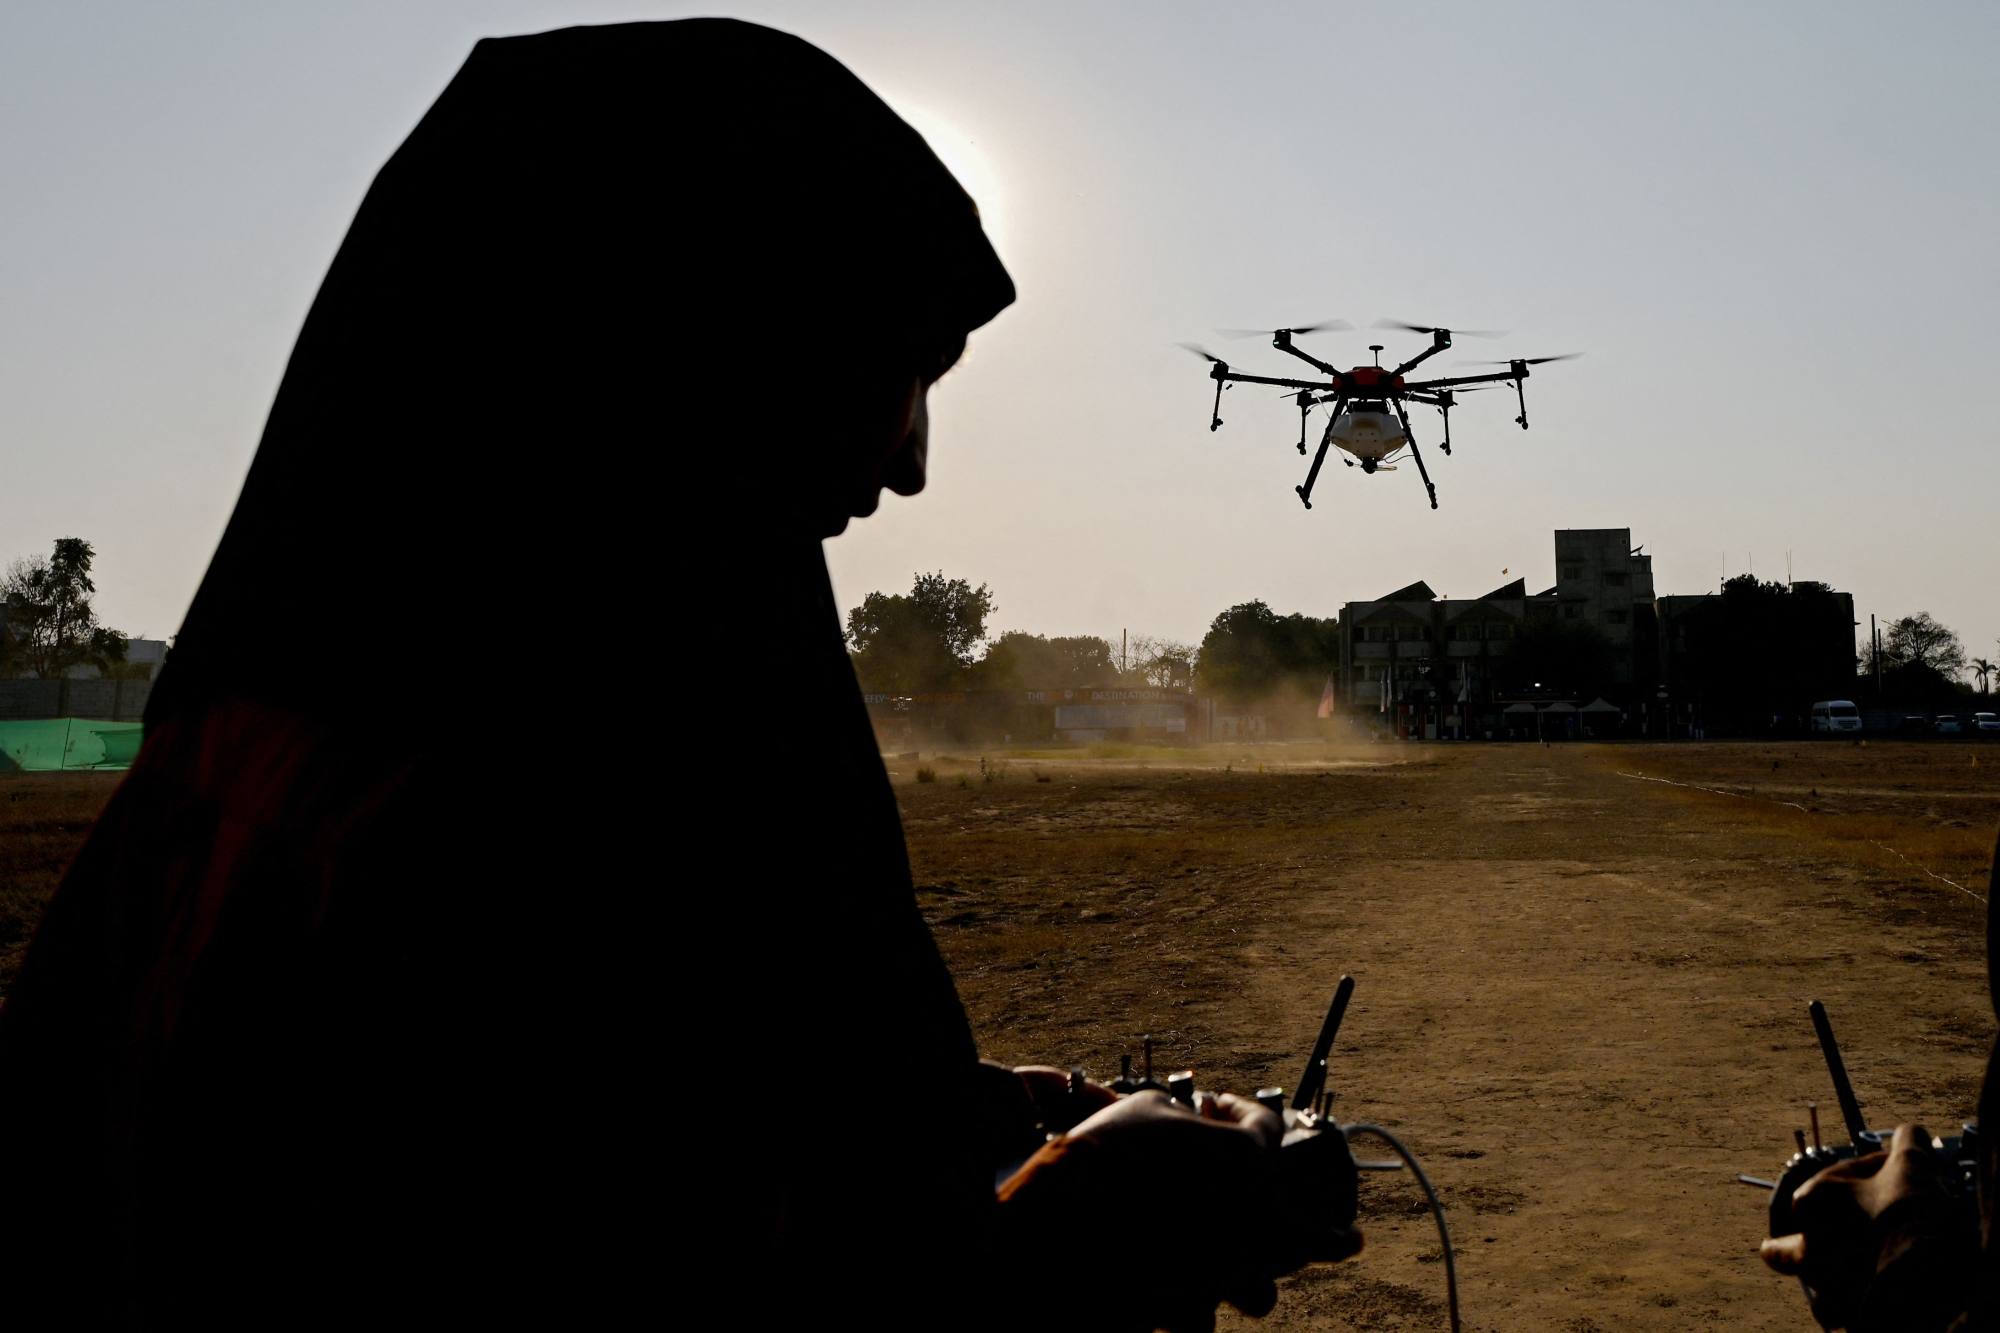 An Indian woman operates a fertiliser-spraying drone in Manesar, outside Delhi, as part of government-backed training initiative. India still needs to address glaring gaps between rural and urban infrastructure. Photo: AFP